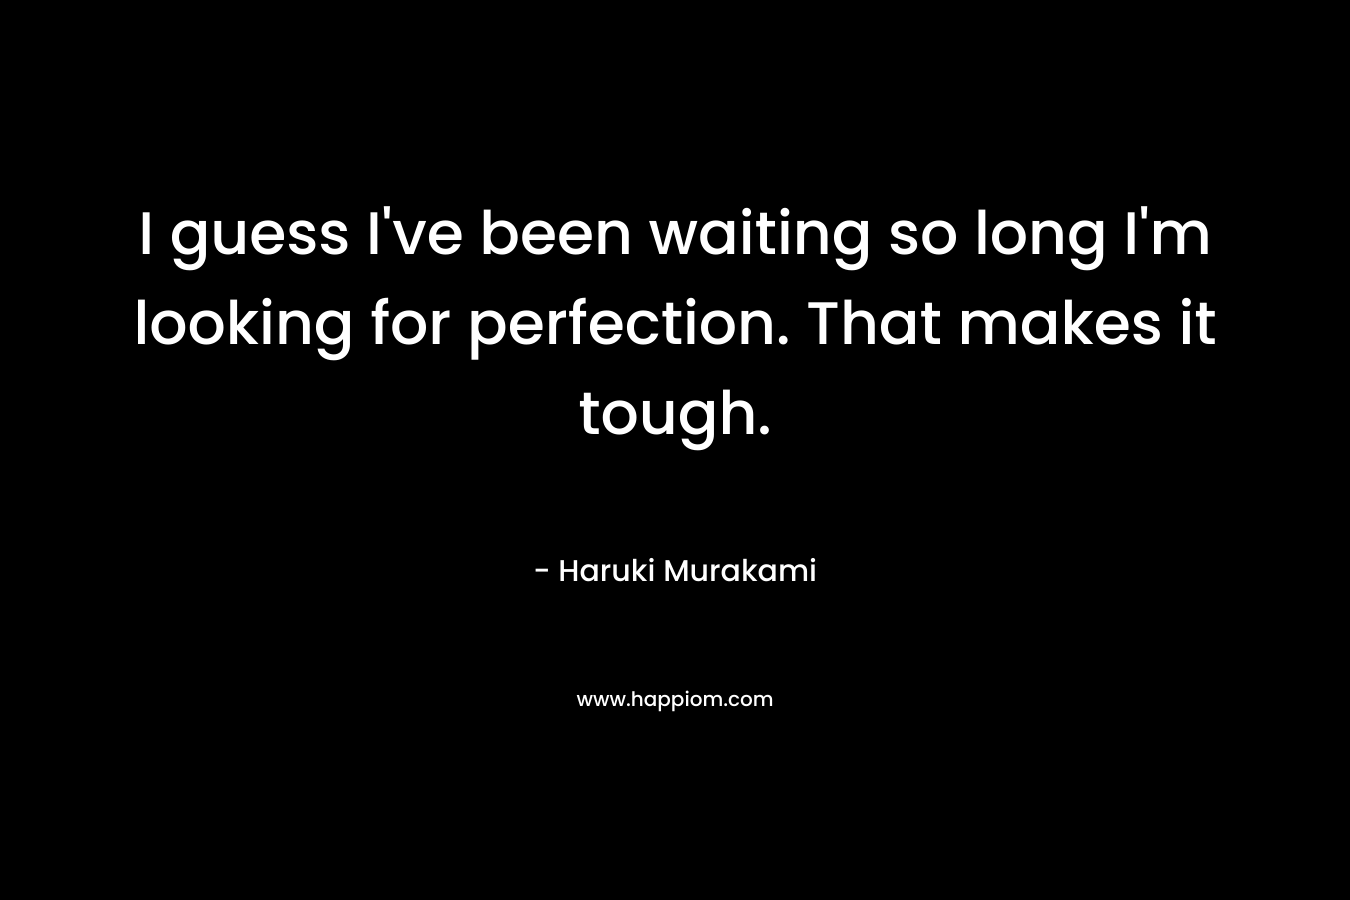 I guess I've been waiting so long I'm looking for perfection. That makes it tough.